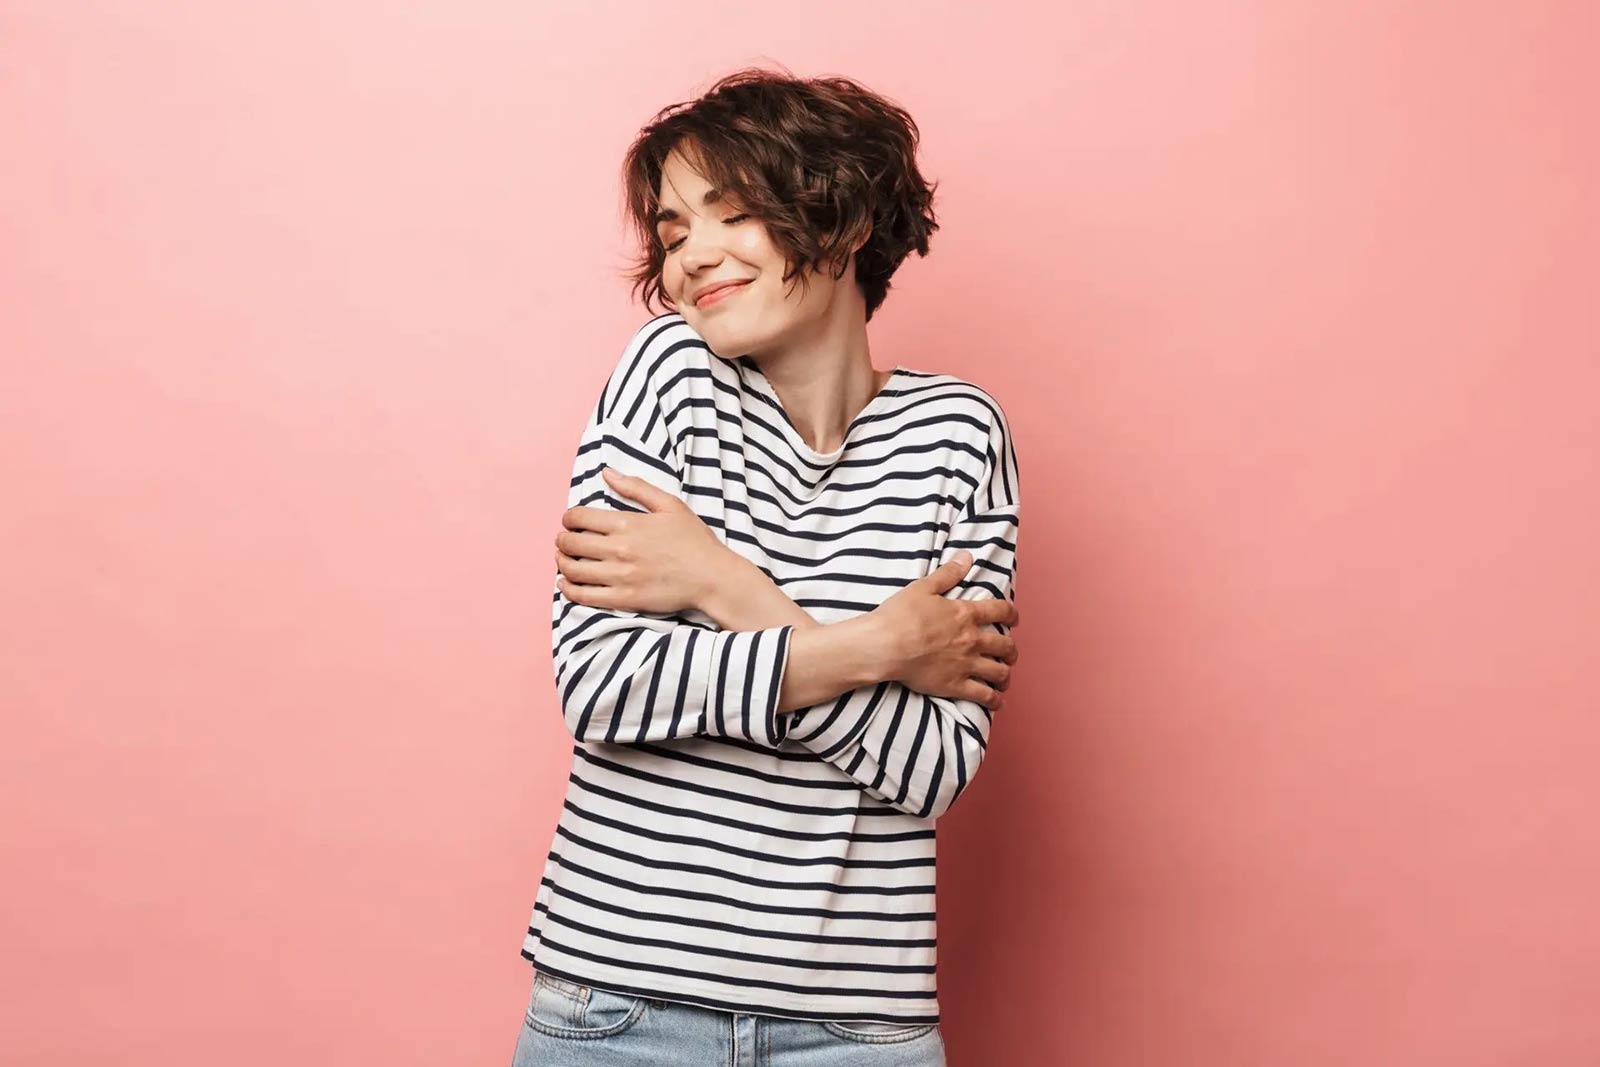 woman in striped shirt hugging herself against a pink background